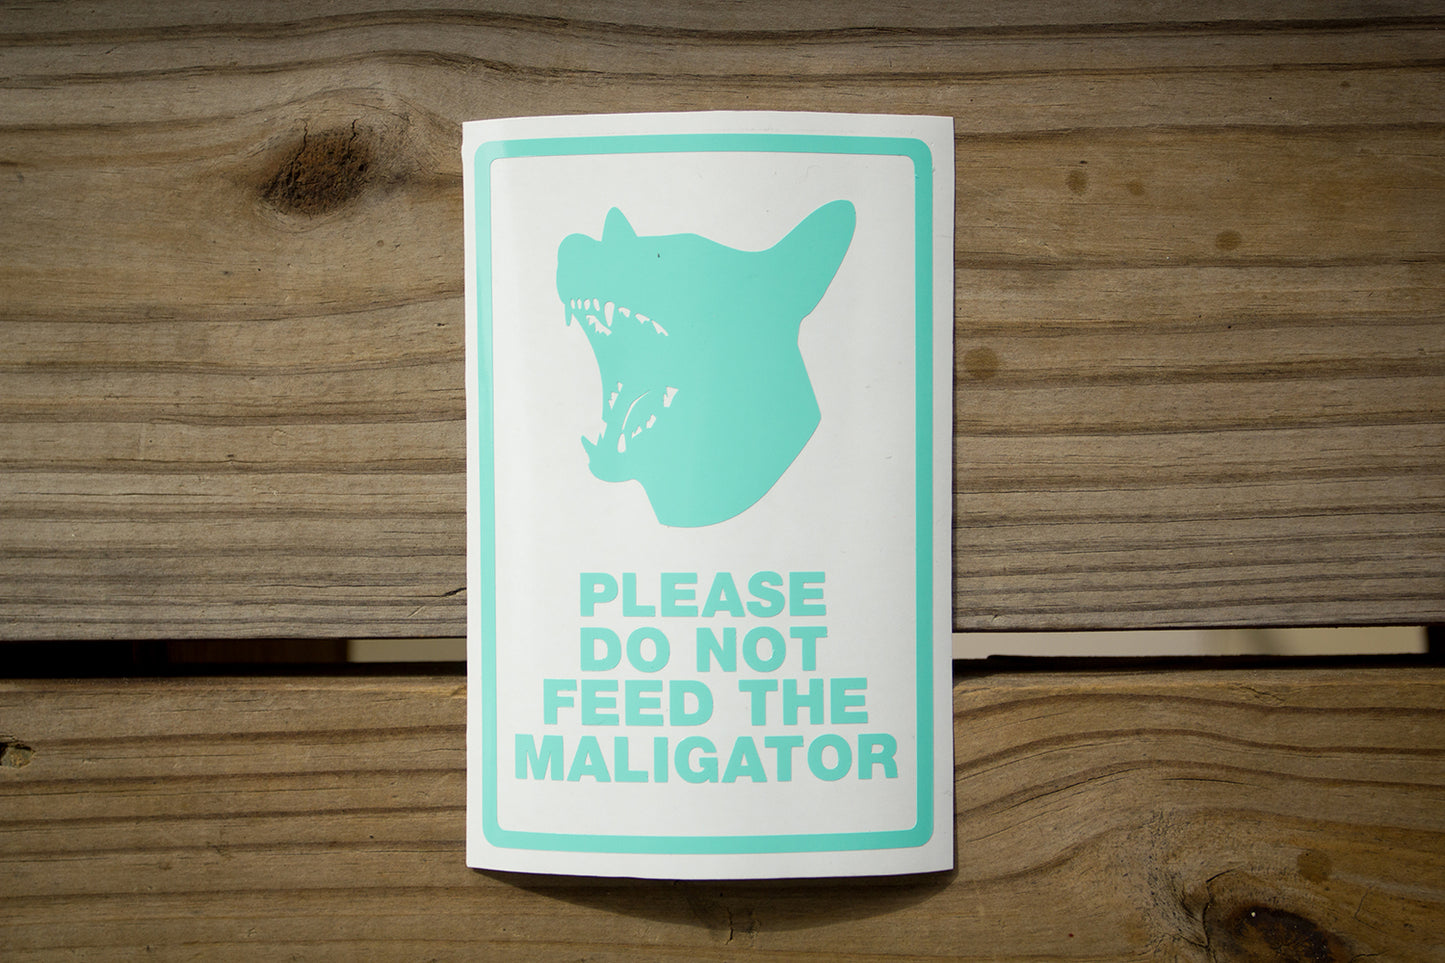 "Please Do Not Feed The Maligator" Decal